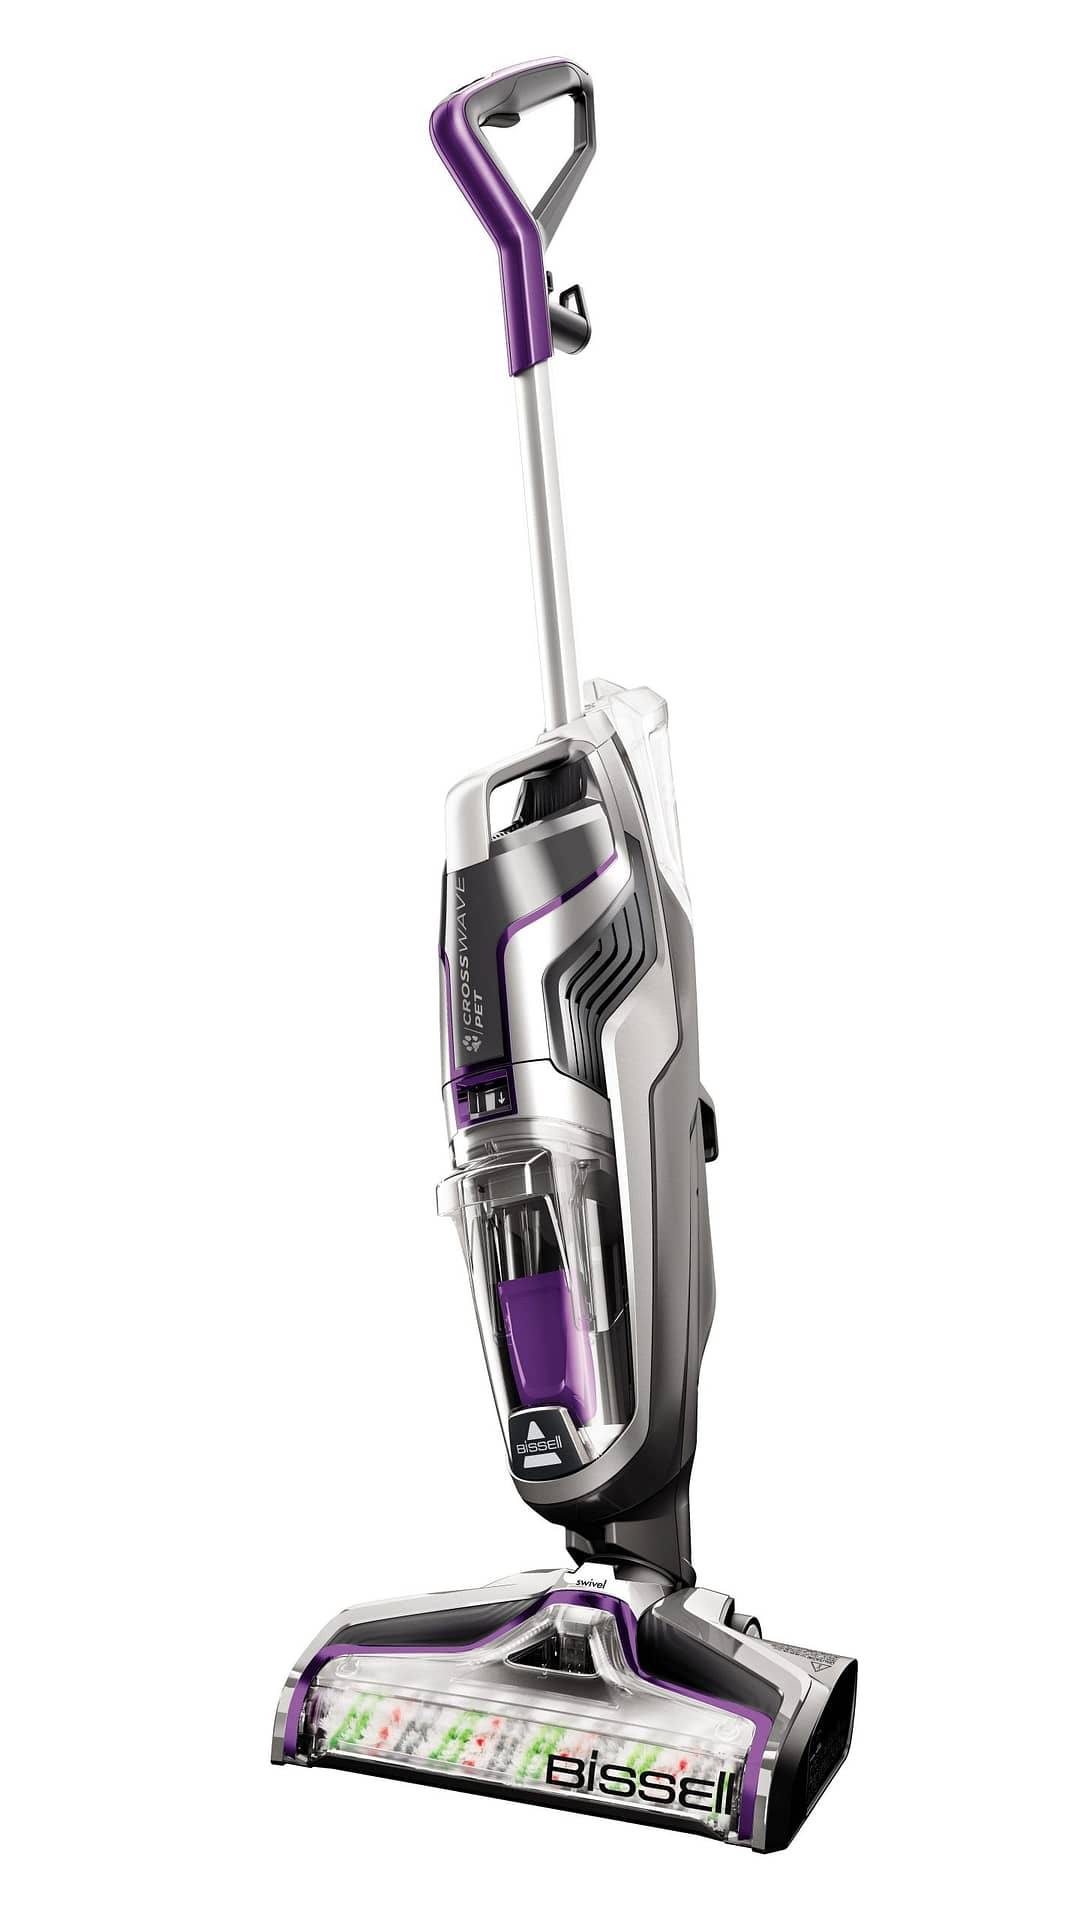 The BISSELL Crosswave Pet Multi-Surface Wet/Dry Vacuum 2328: Your All-In-One Cleaning Solution